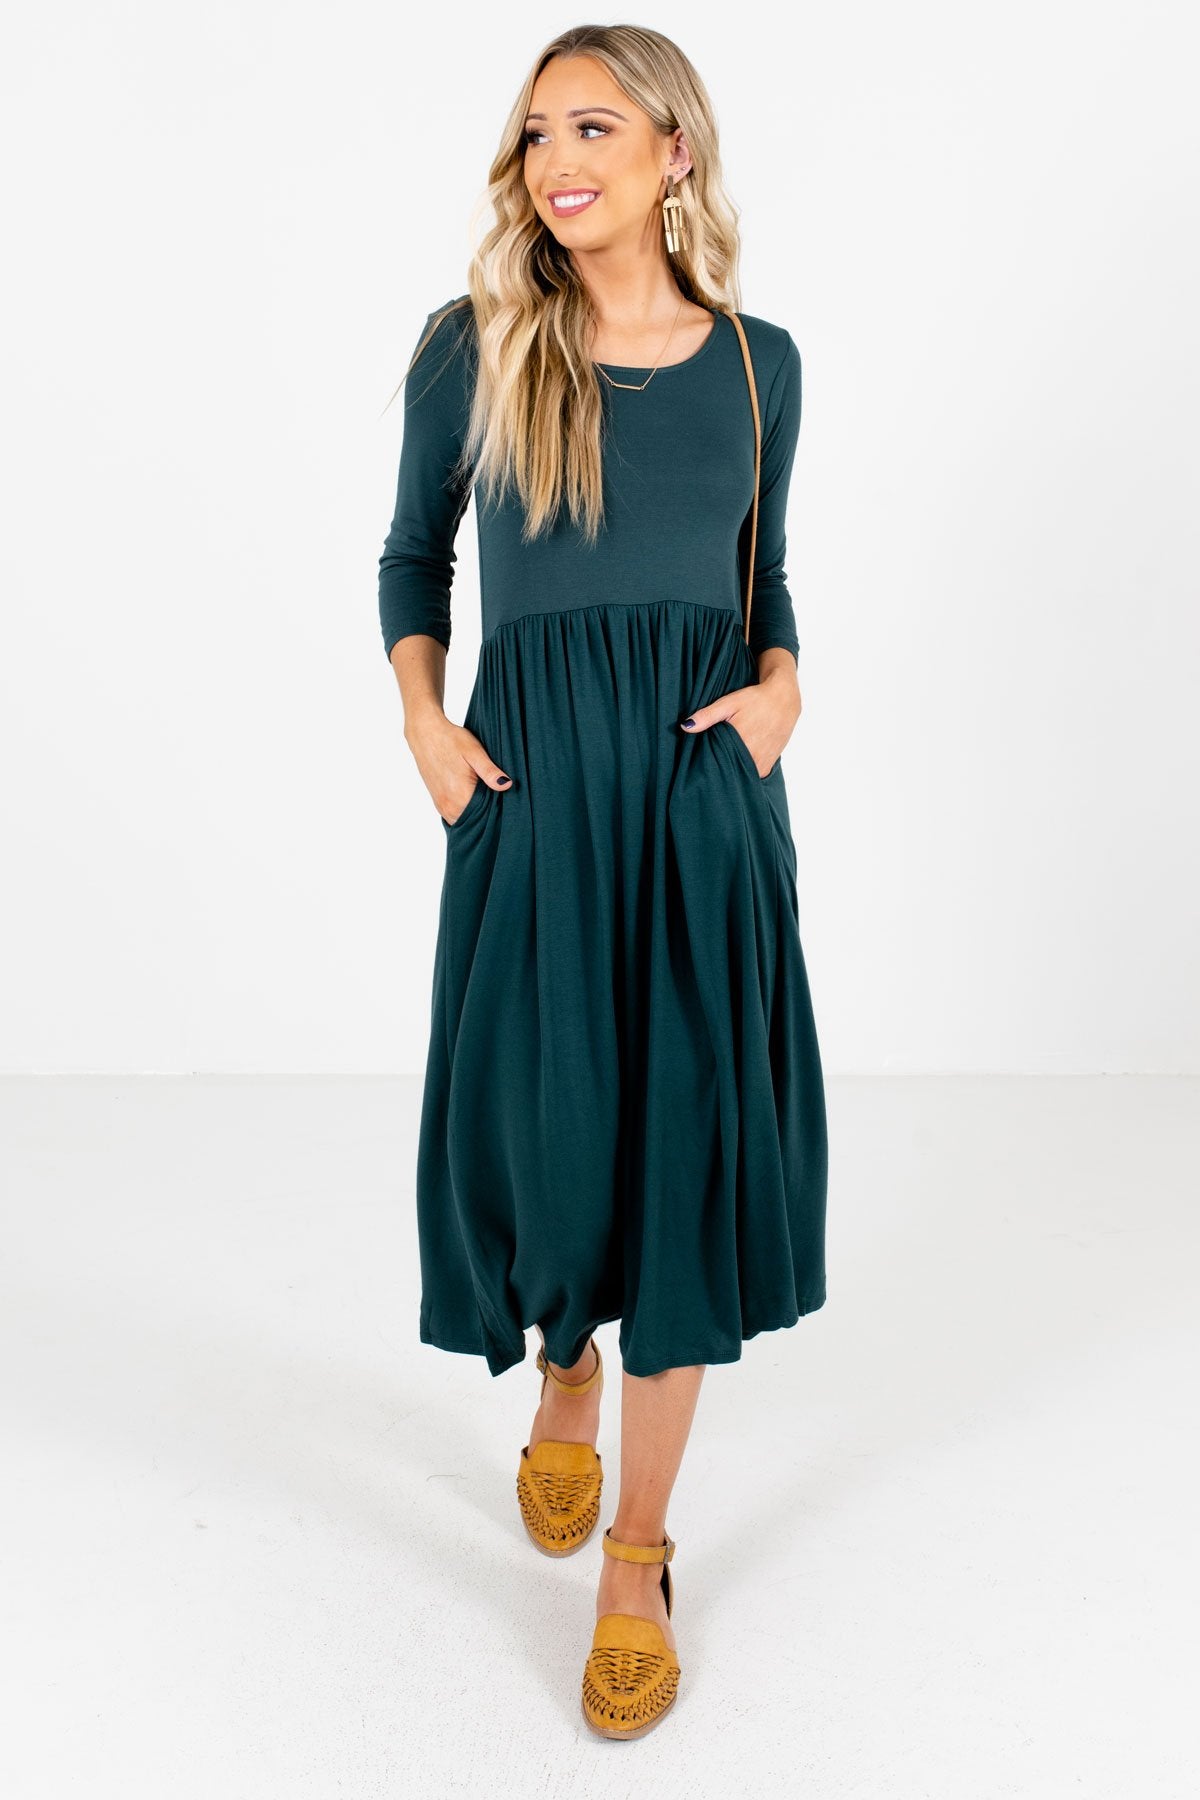 Teal Green ¾ Length Sleeve Boutique Midi Dresses for Women